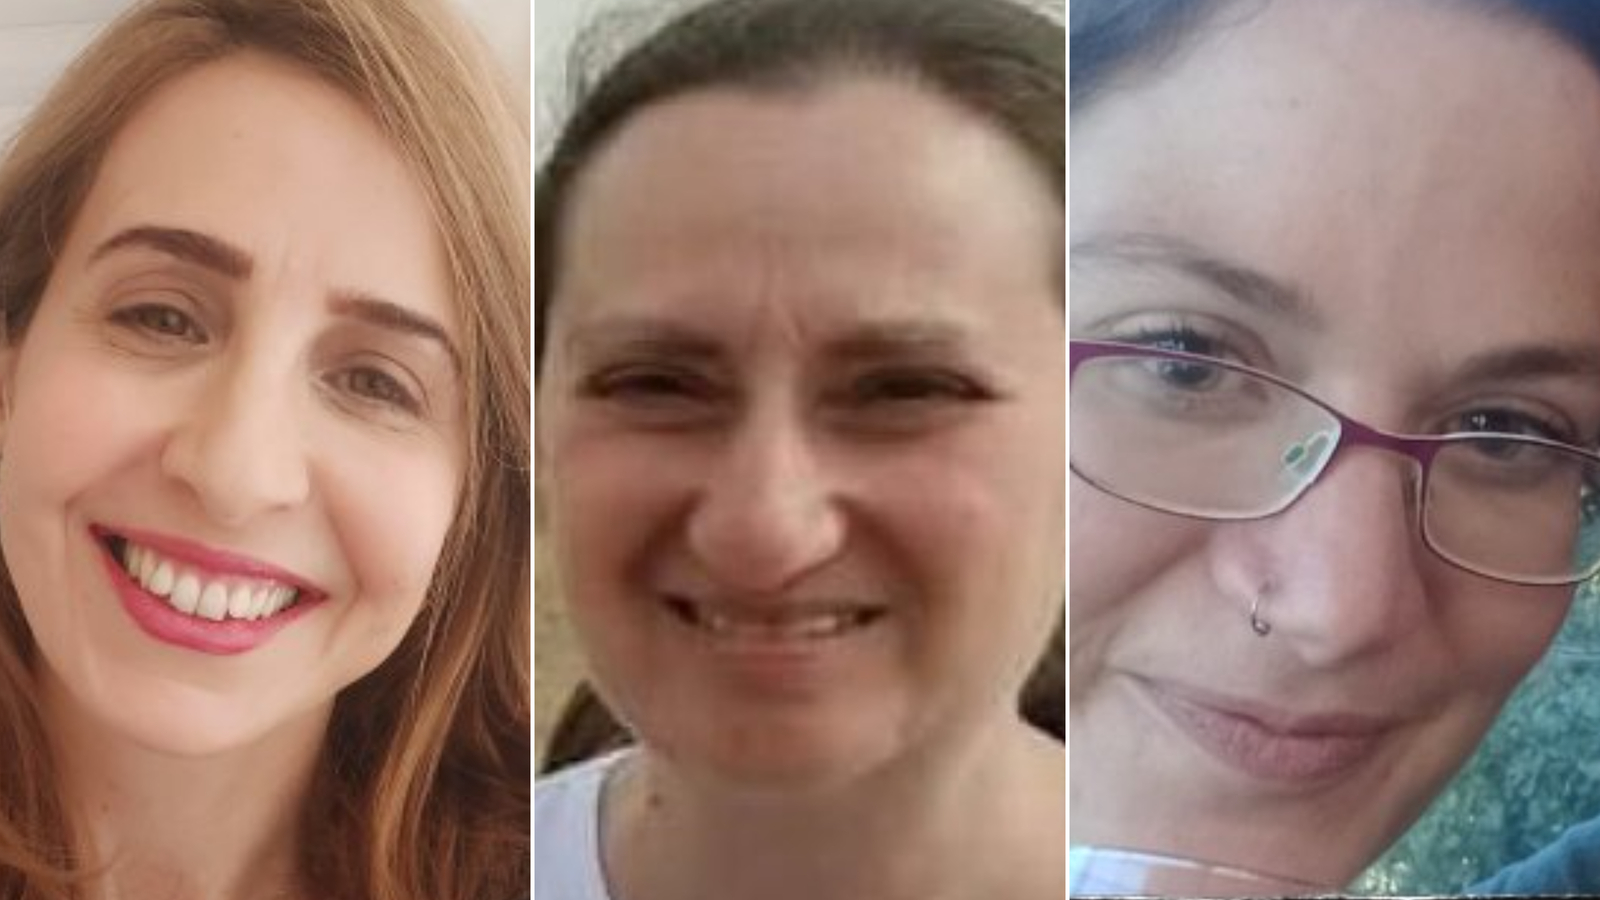 Daniel Aloni, Yelena Trupanob, Rimon Kirsht - three women who appeared in a video released by Hamas on Monday, October 30, and who are believed to be captives being held by the Palestinian militant group since its terror attack on Israel on October 7.